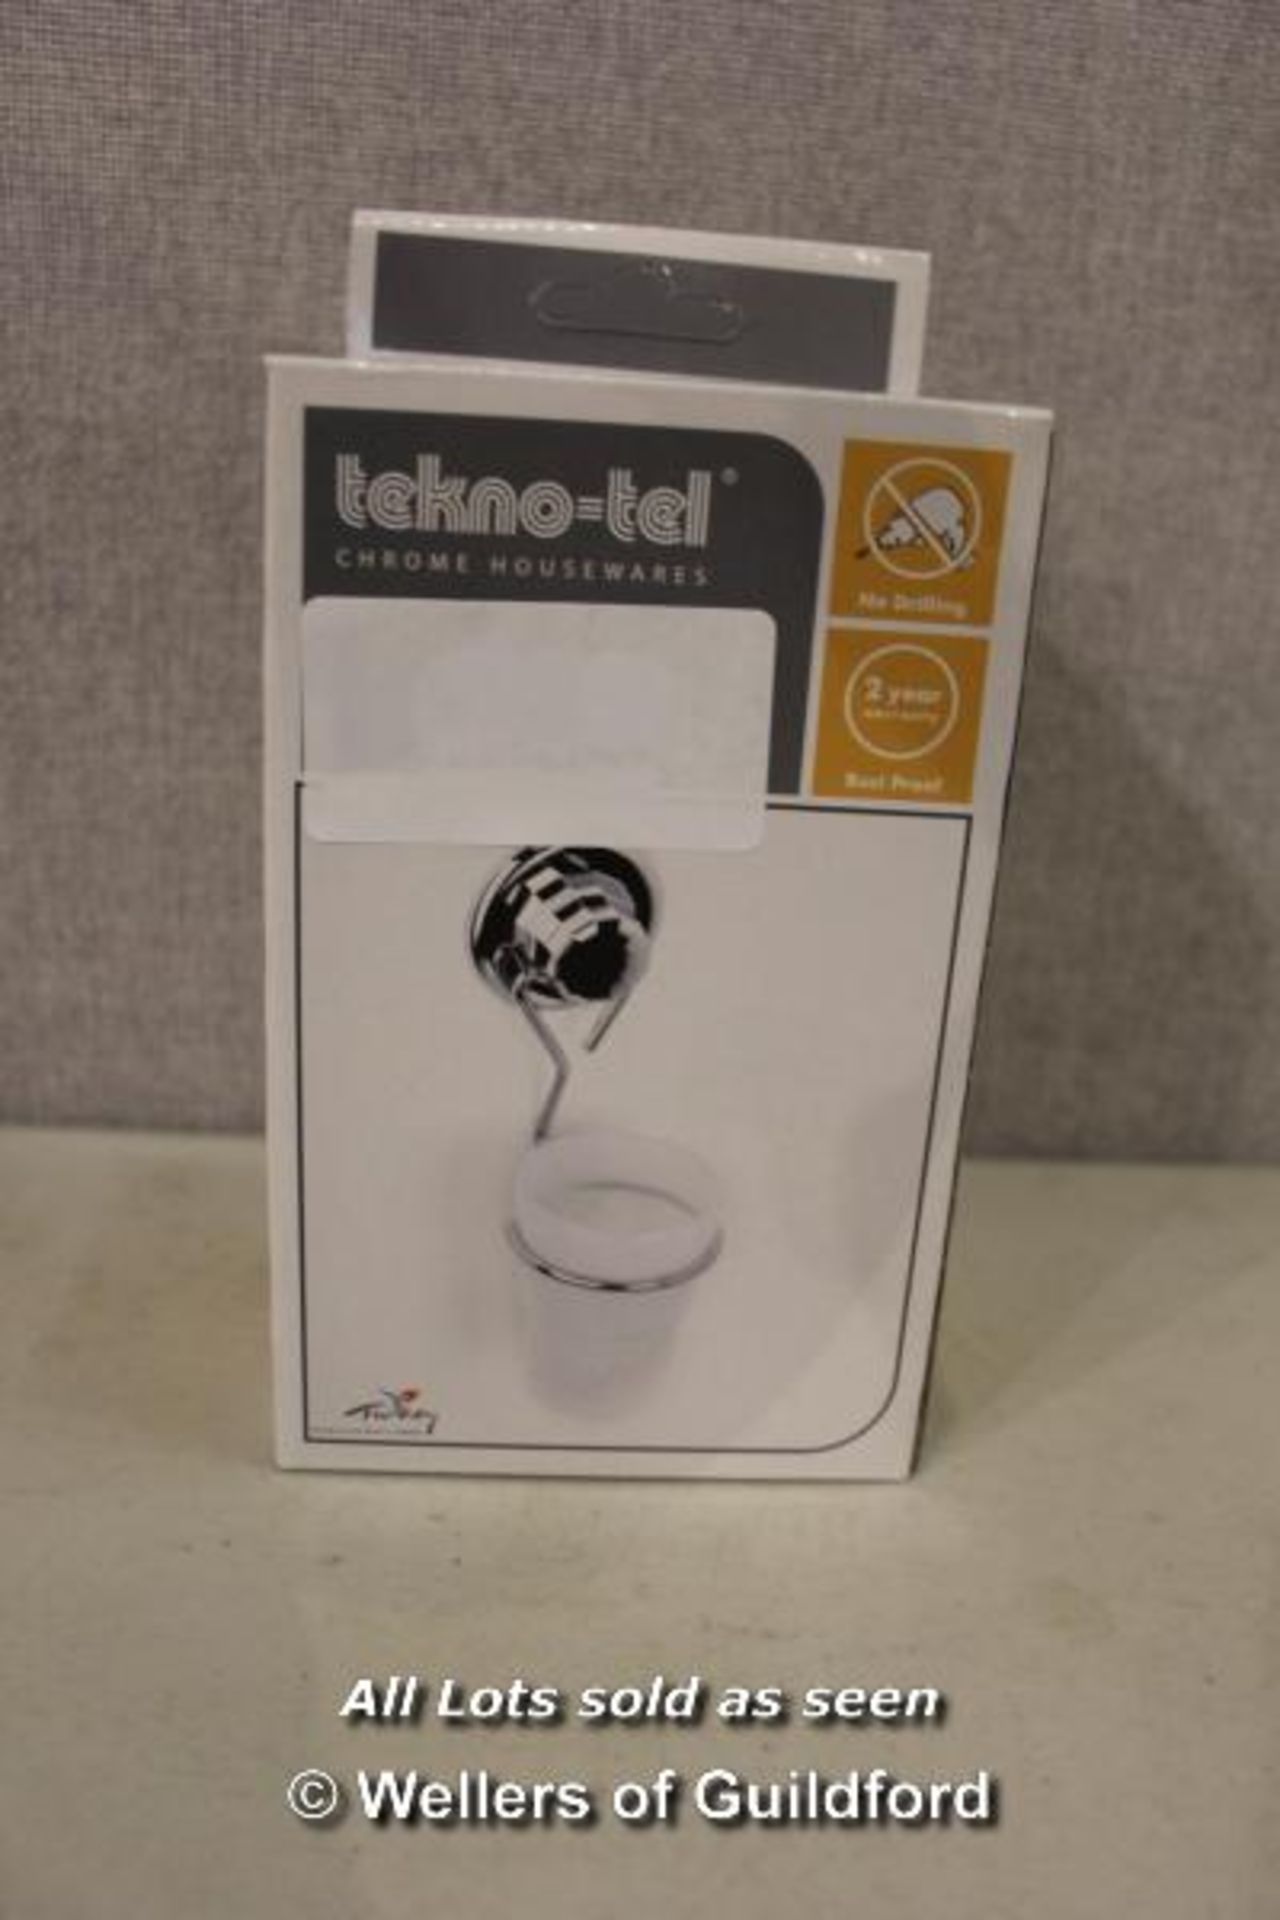 BRAND NEW TEKNO-TEL DM.274 TOOTHBRUSH HOLDER WITH SUCTION